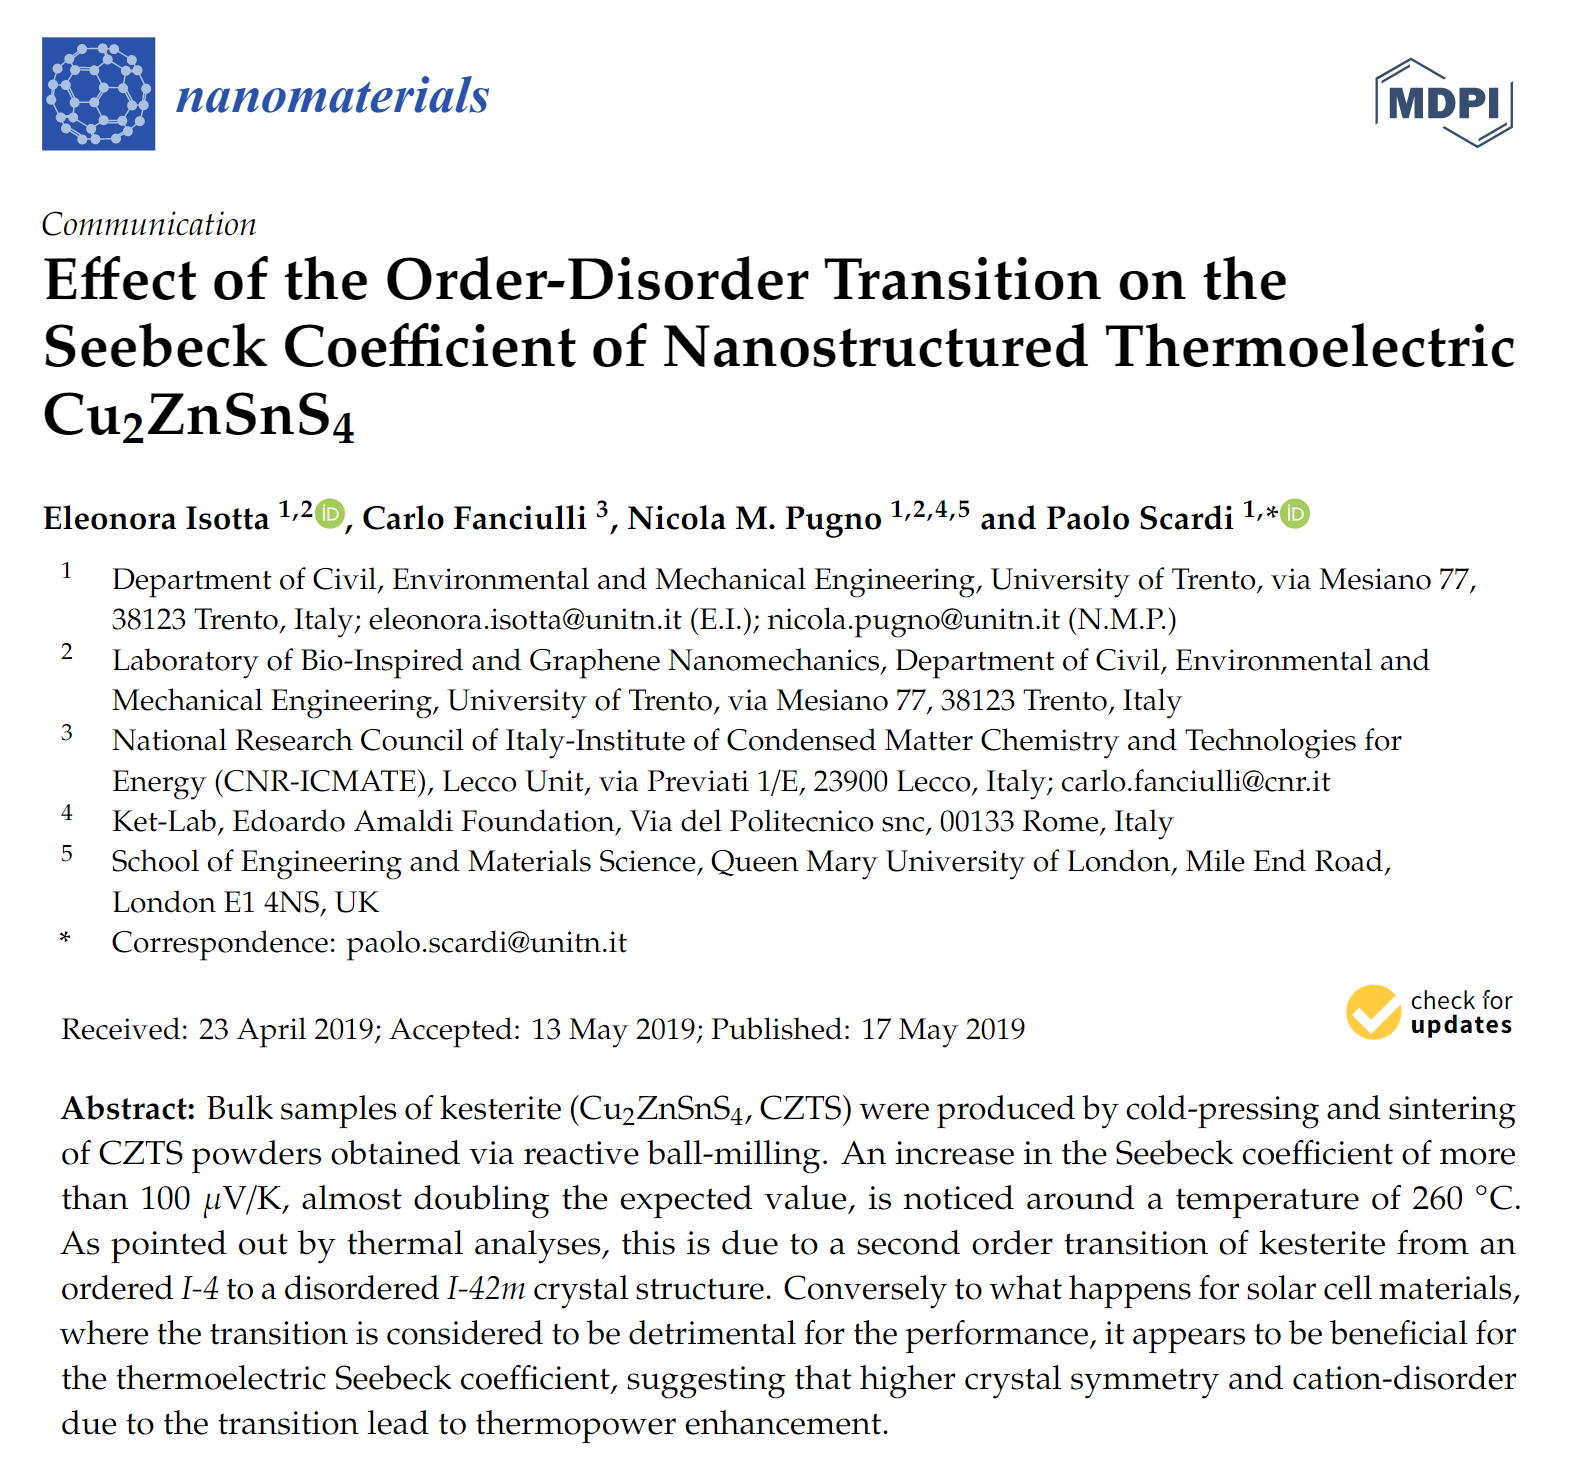 EFFECT OF THE ORDER-DISORDER TRANSITION ON THE SEEBECK COEFFIC